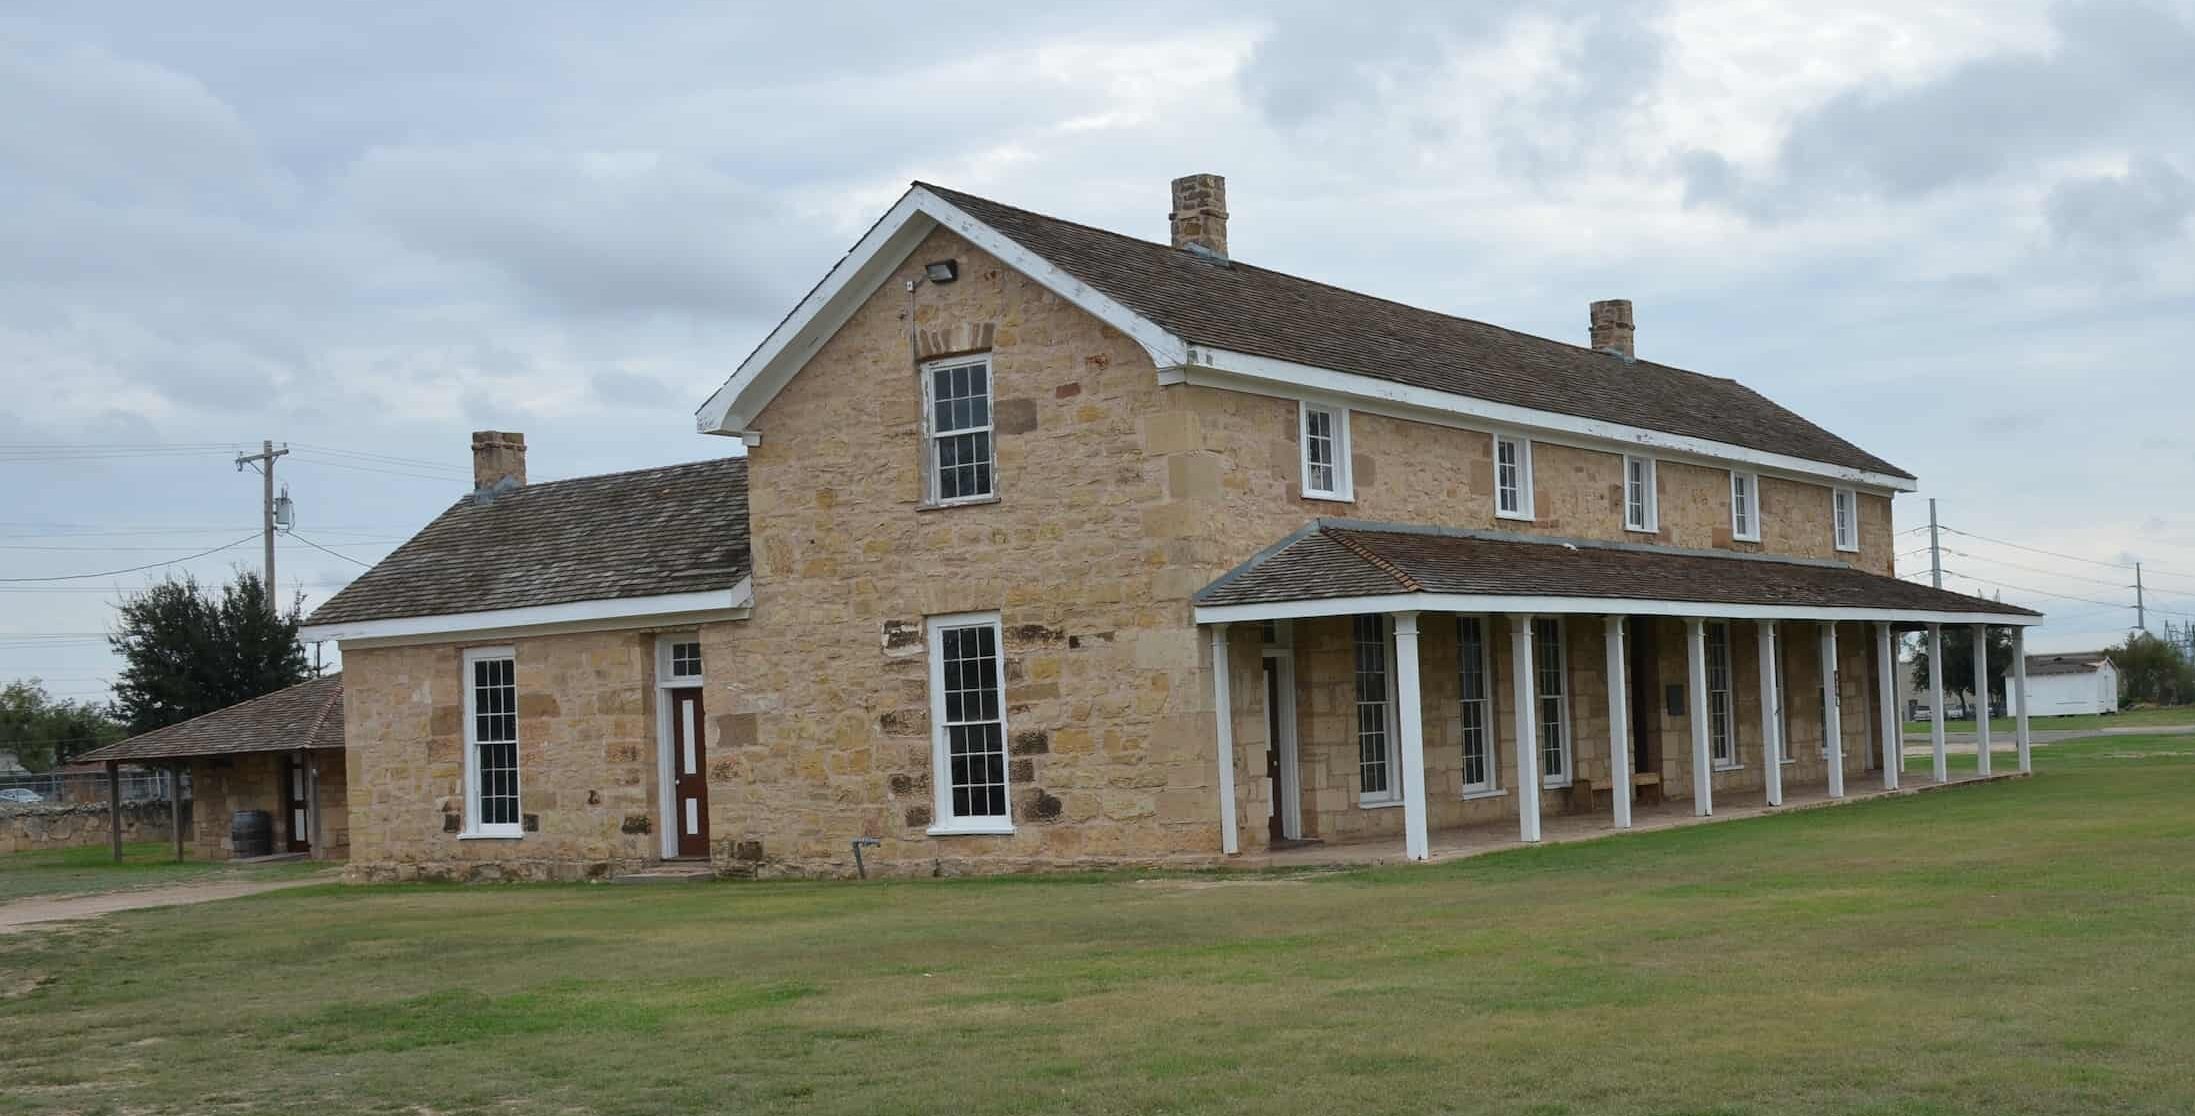 Headquarters at Fort Concho in San Angelo, Texas